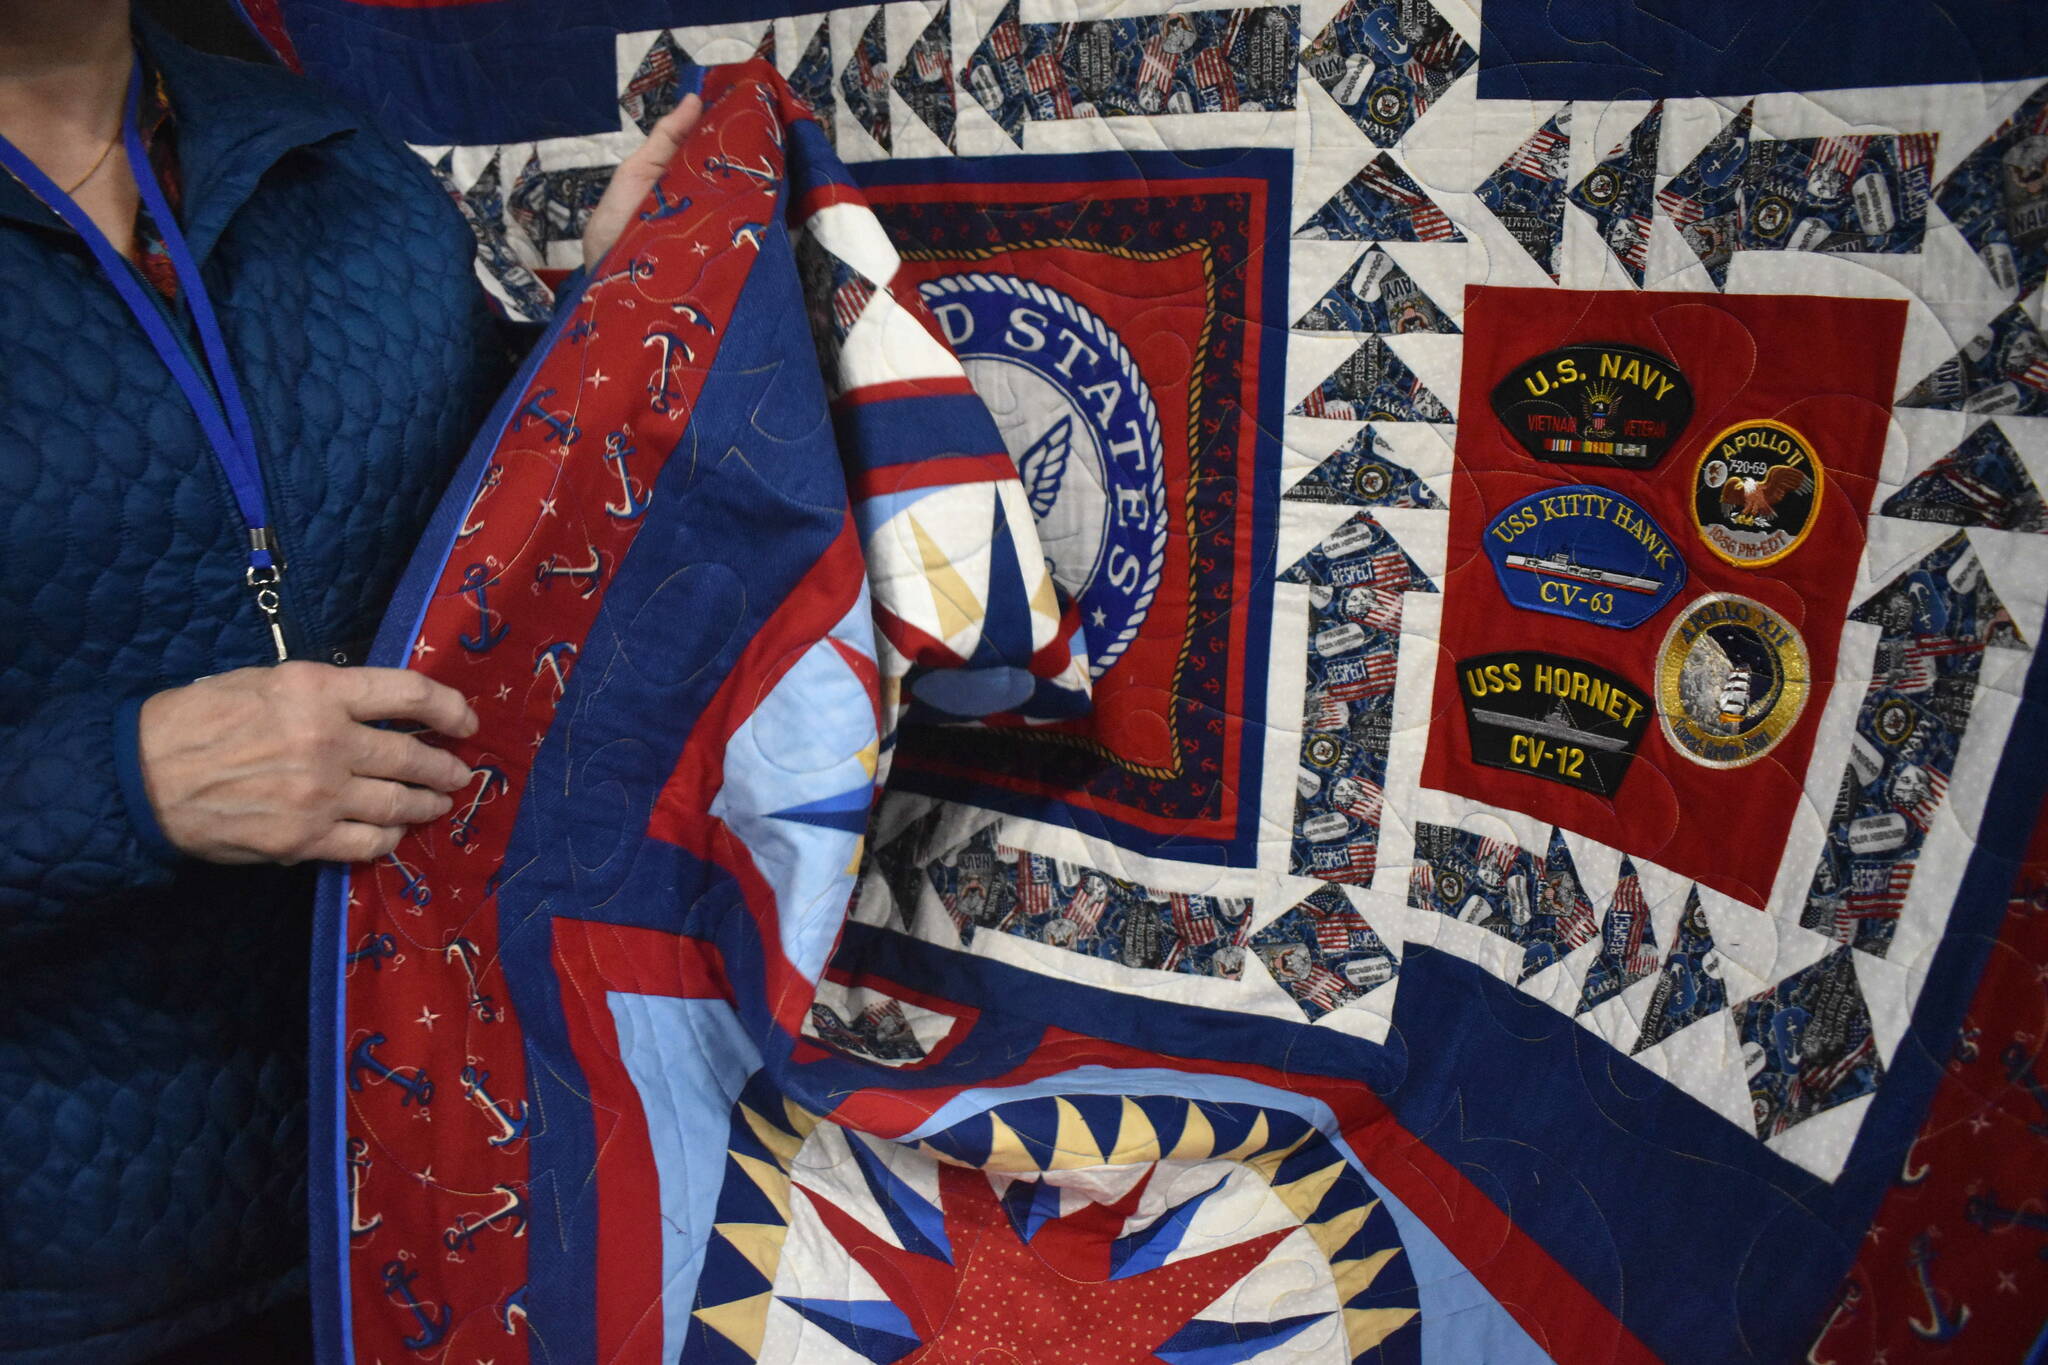 Susanne Wick’s Quilt of Valor for her husband Robert Wick, commemorating his service in the U.S. Navy with real patches from the ships on which her husband served.